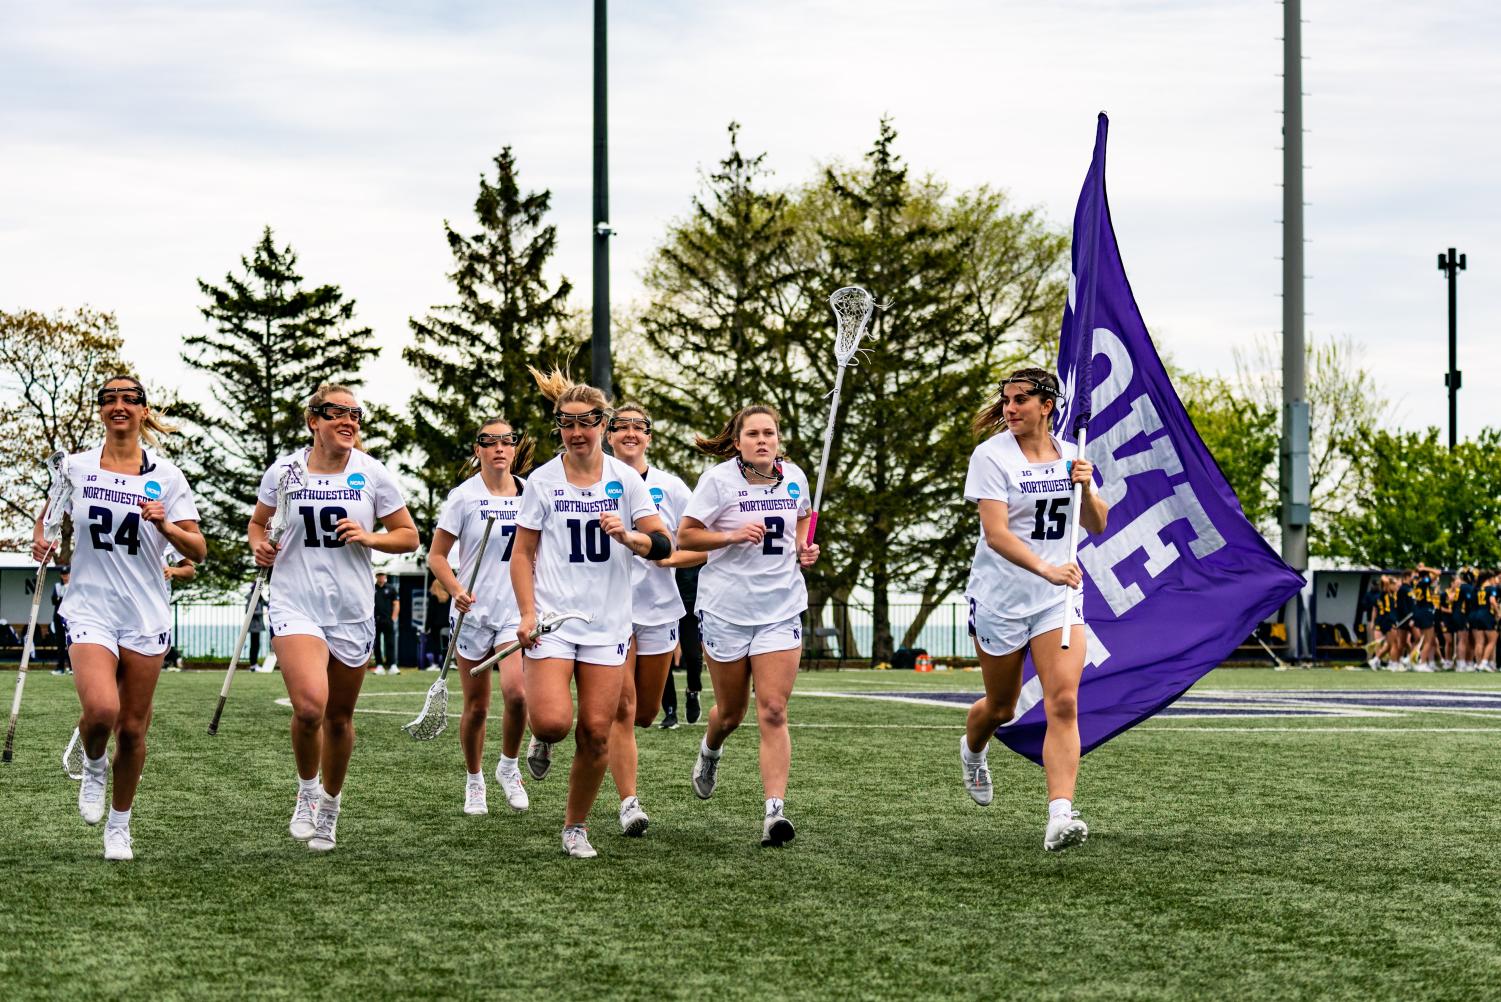 Seven+athletes+in+white+jerseys+run+as+one+carries+a+purple+flag.